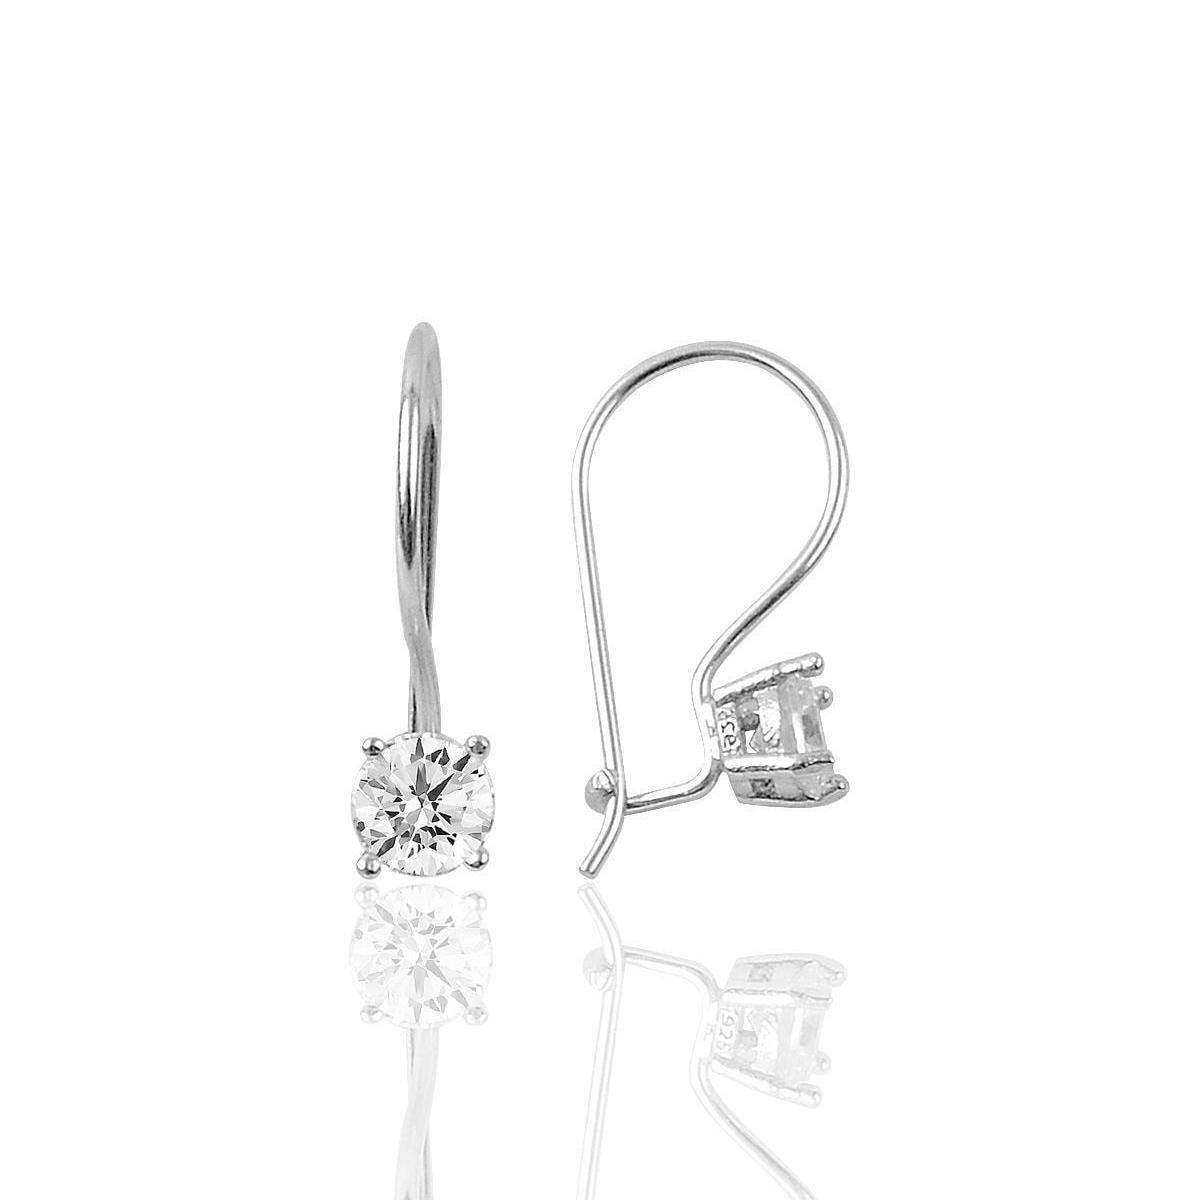 Solitaire Jackets Earrings • Best Diamond Solitaire Earrings - Trending Silver Gifts